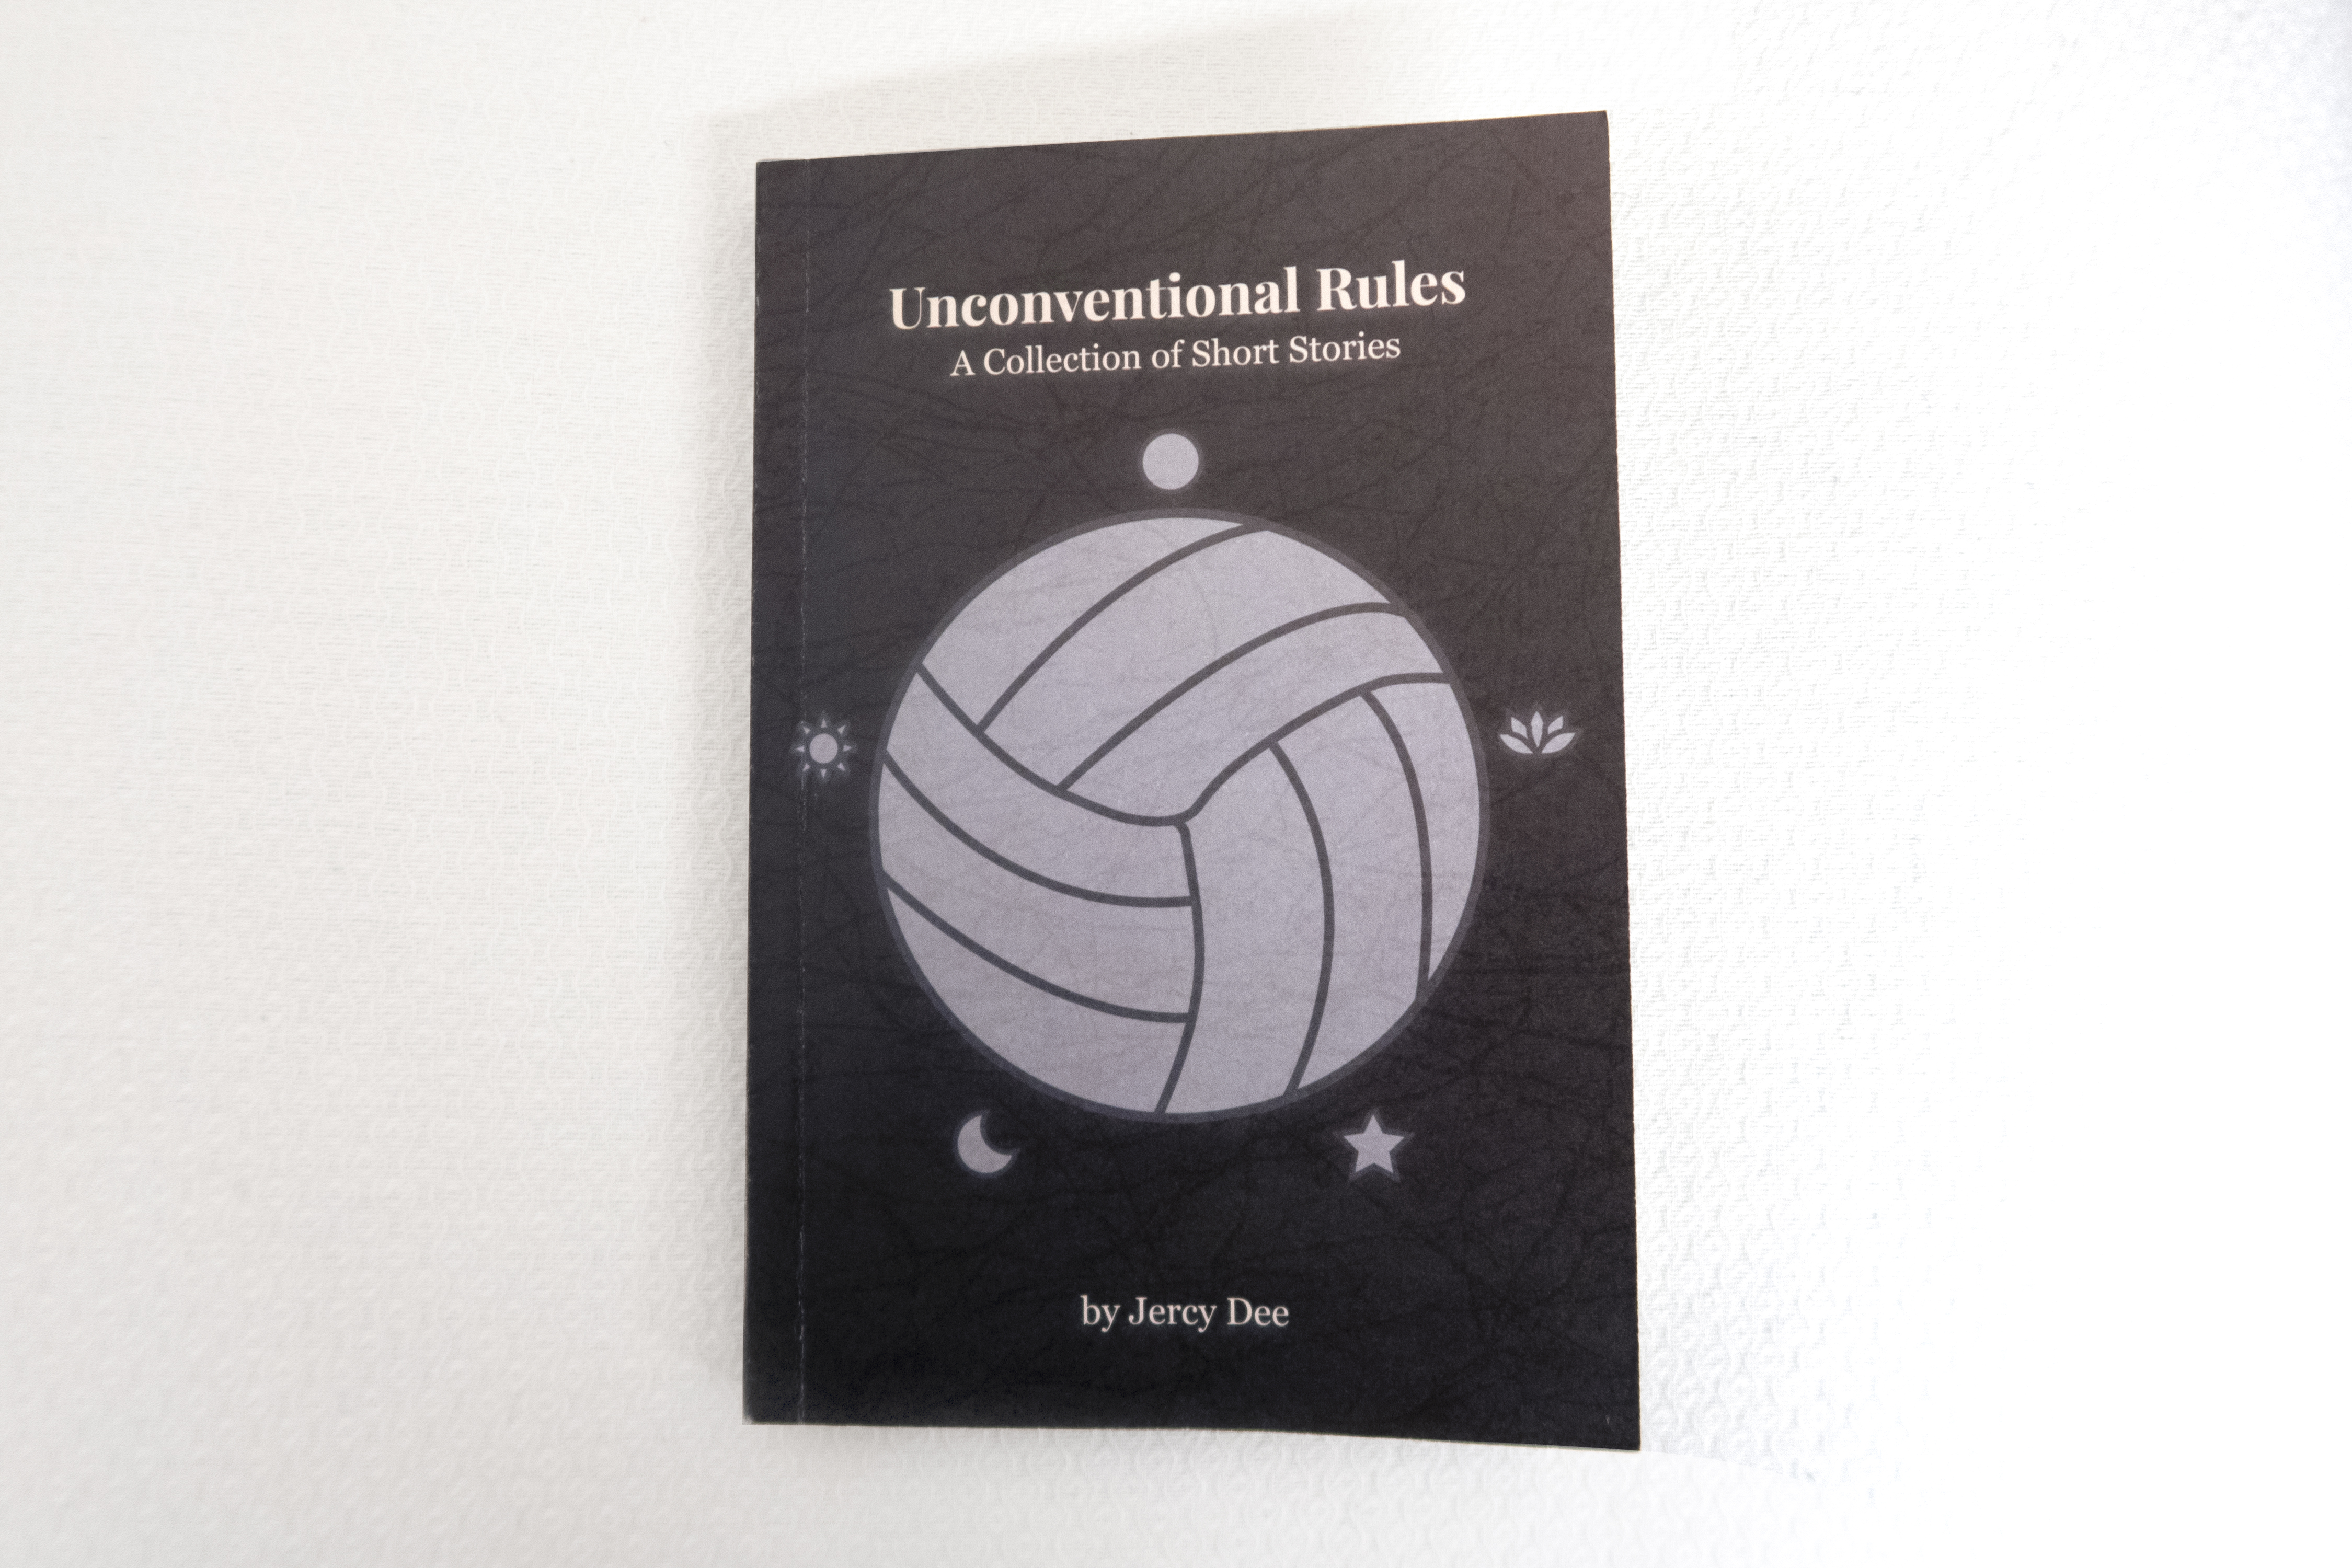 A printed copy of Unconventional Rule's front cover.